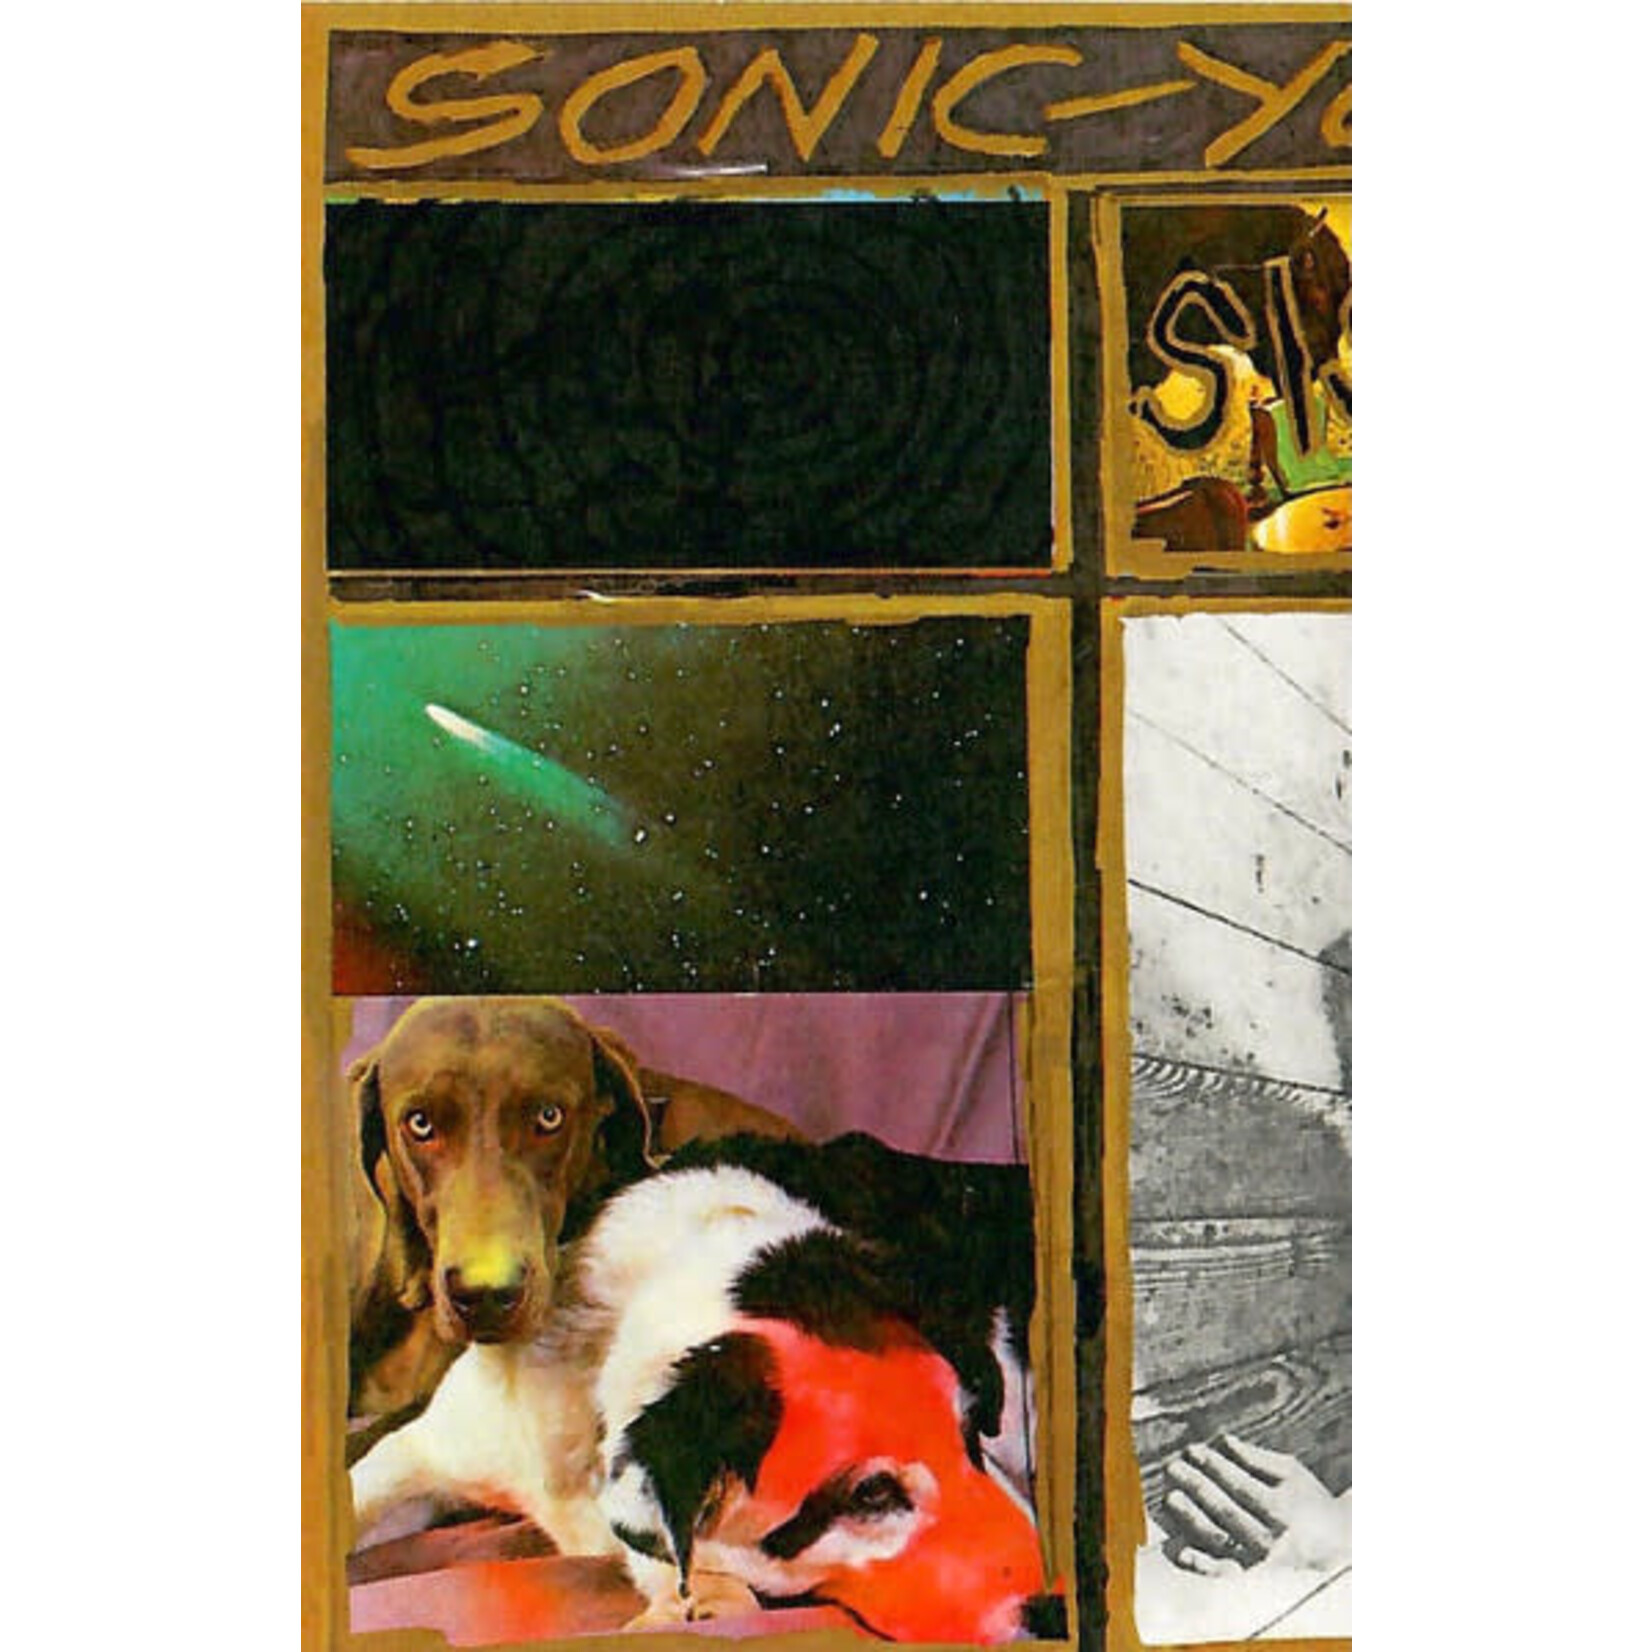 Goofin Sonic Youth - Sister (Tape)